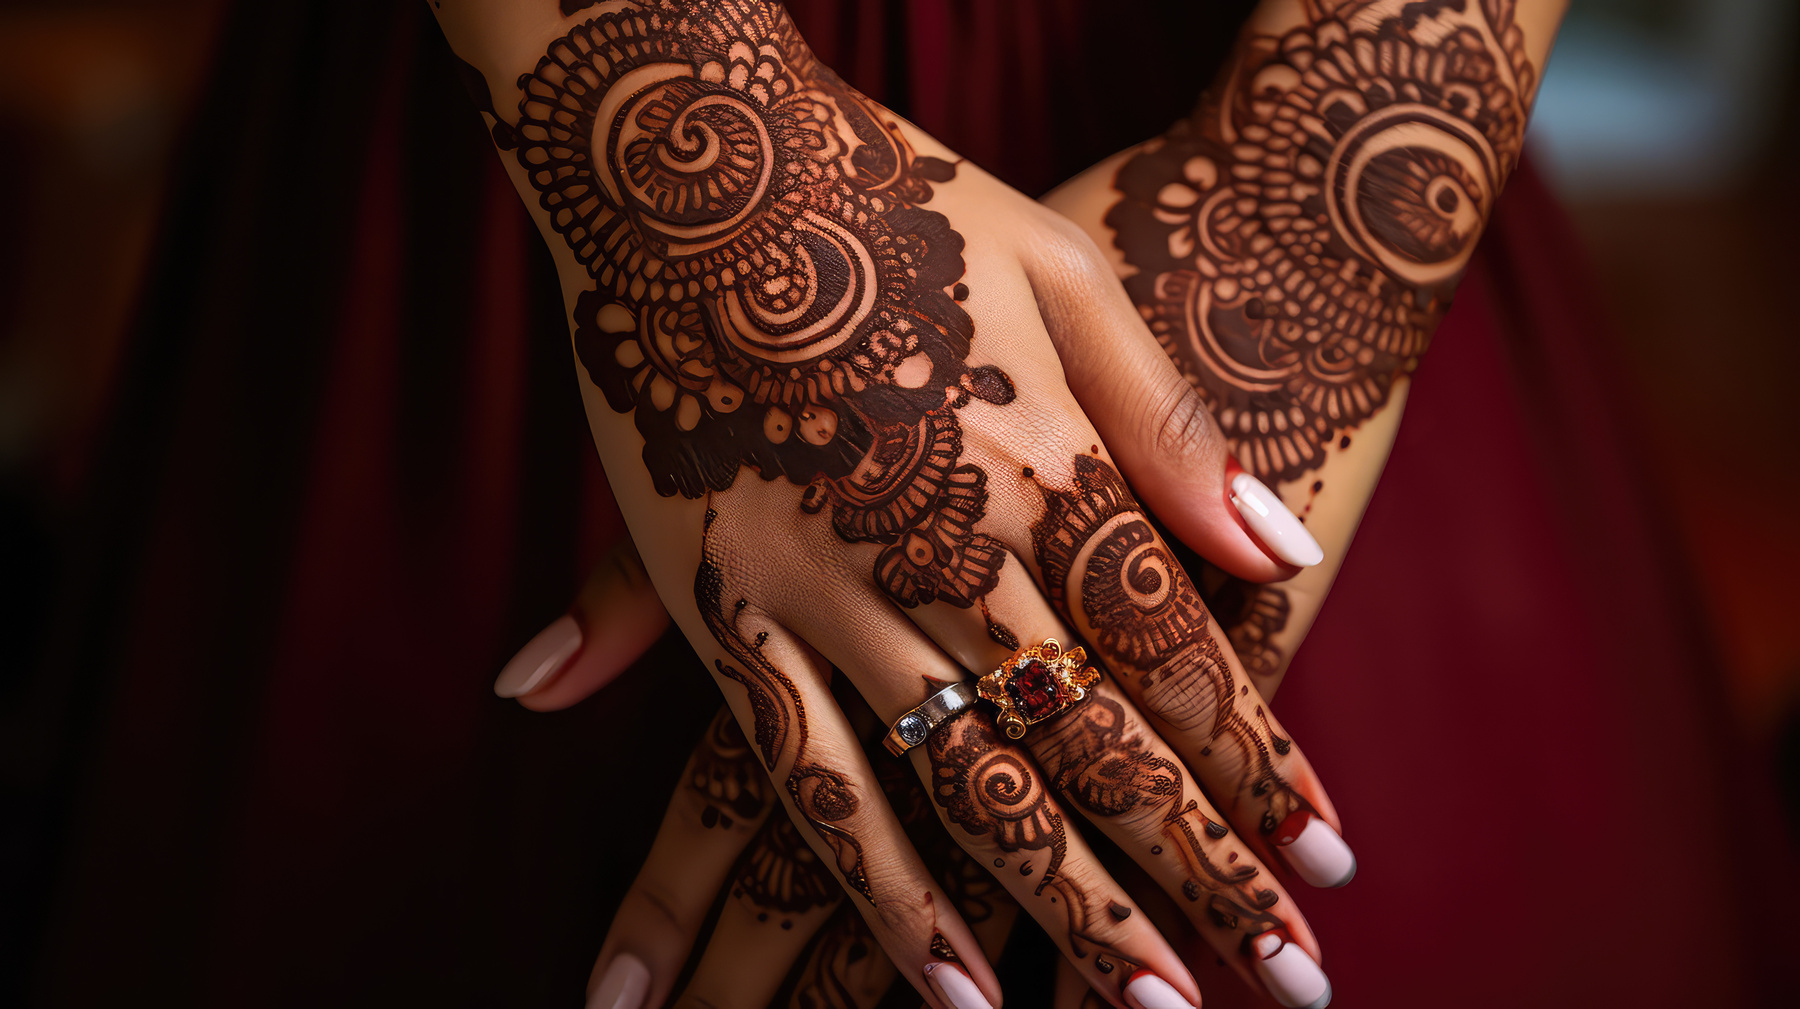 Henna Art Station for Indian Dinner Party - Vibrant cultural designs for a festive home gathering